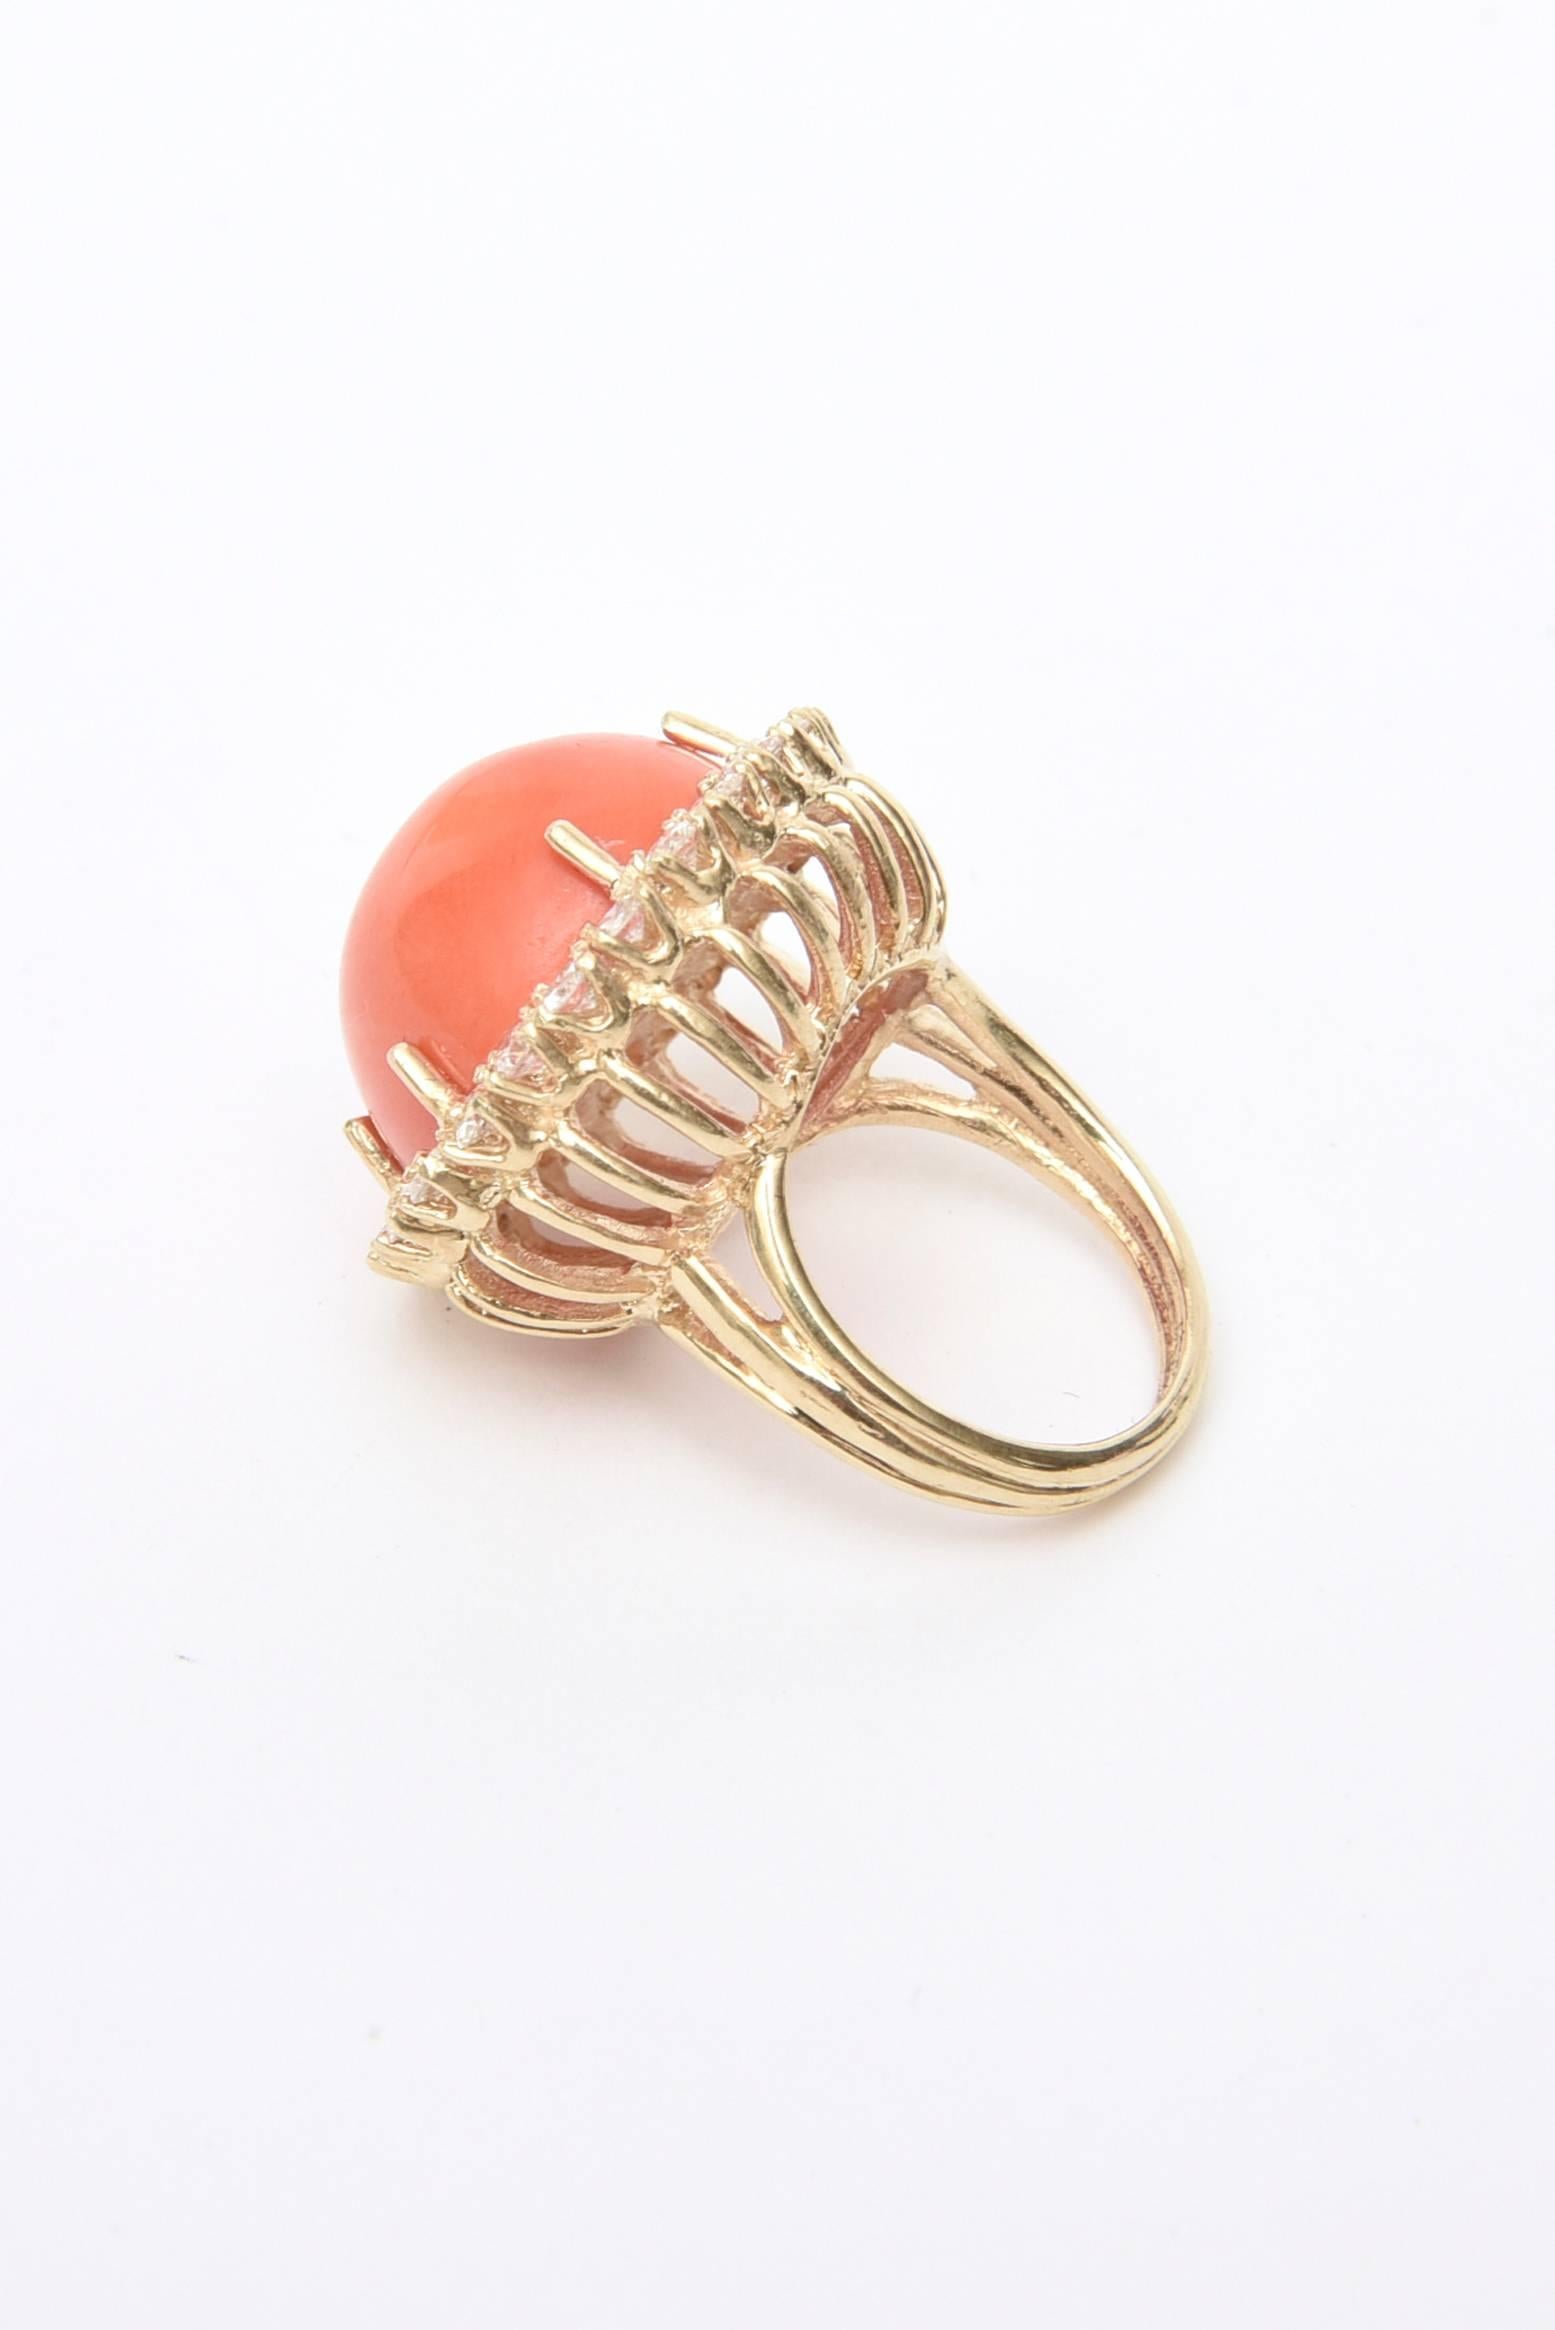 Women's  Stunning Vintage Coral, Diamond and 14 Karat Yellow Gold Dome Cocktail Ring